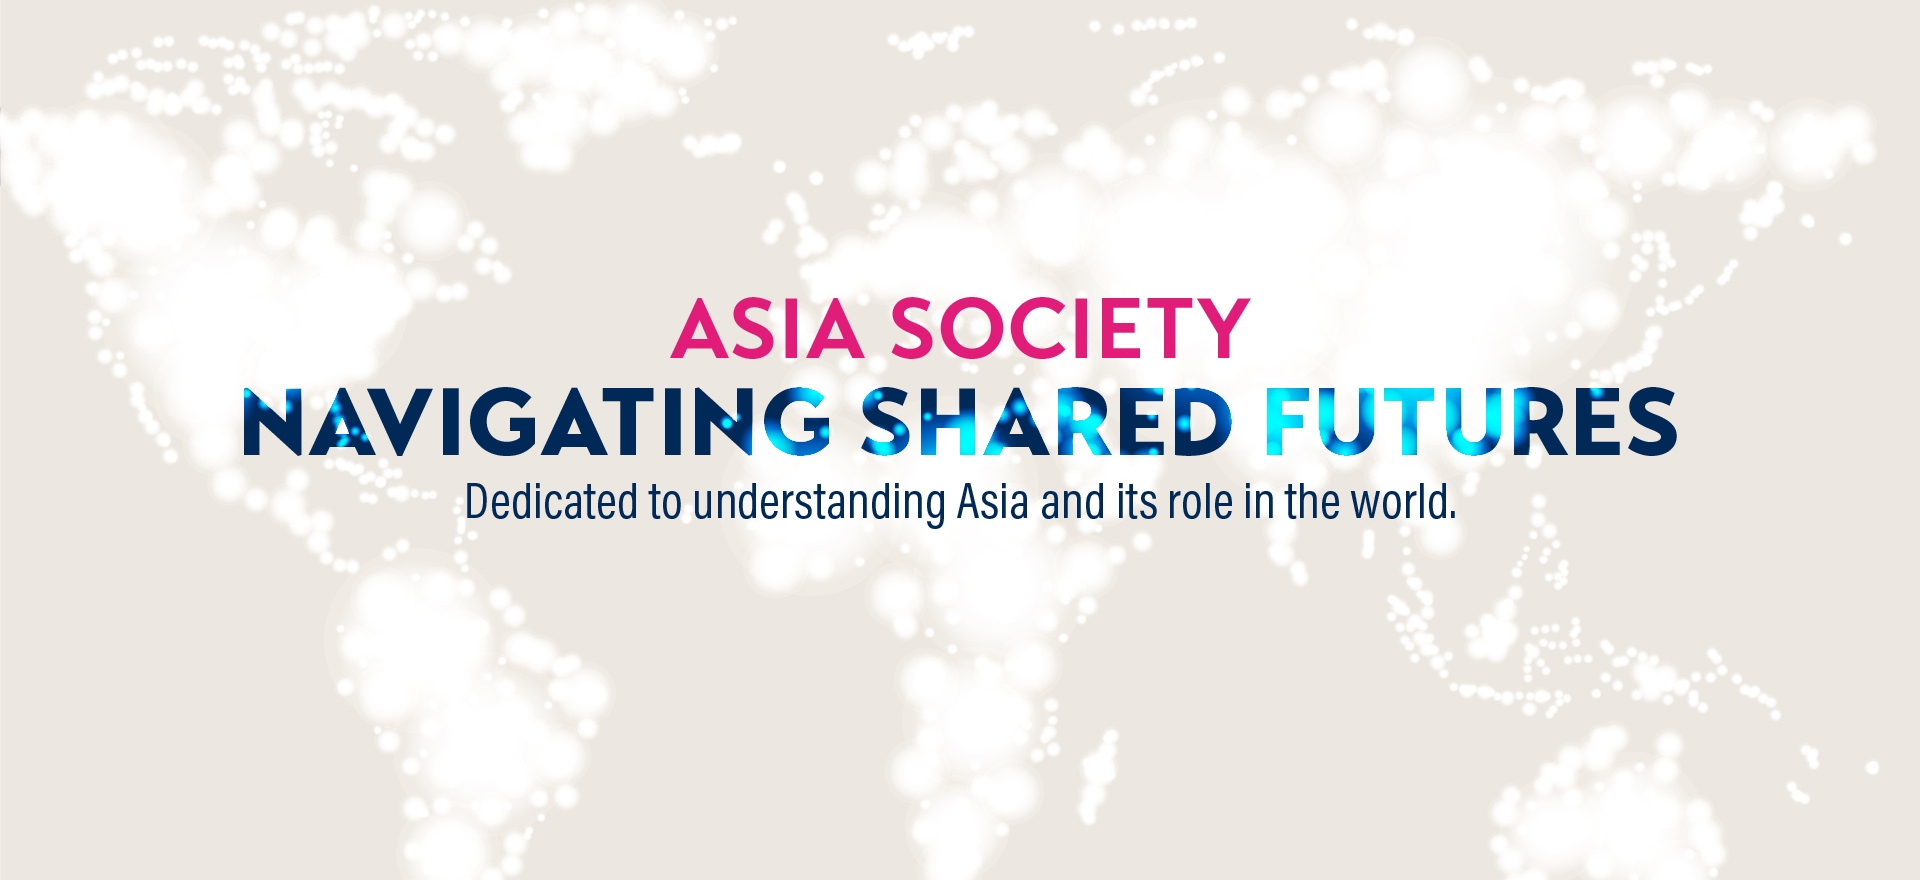 Asia Society Navigating Shared Futures. Dedicated to understanding Asia and its role in the world.